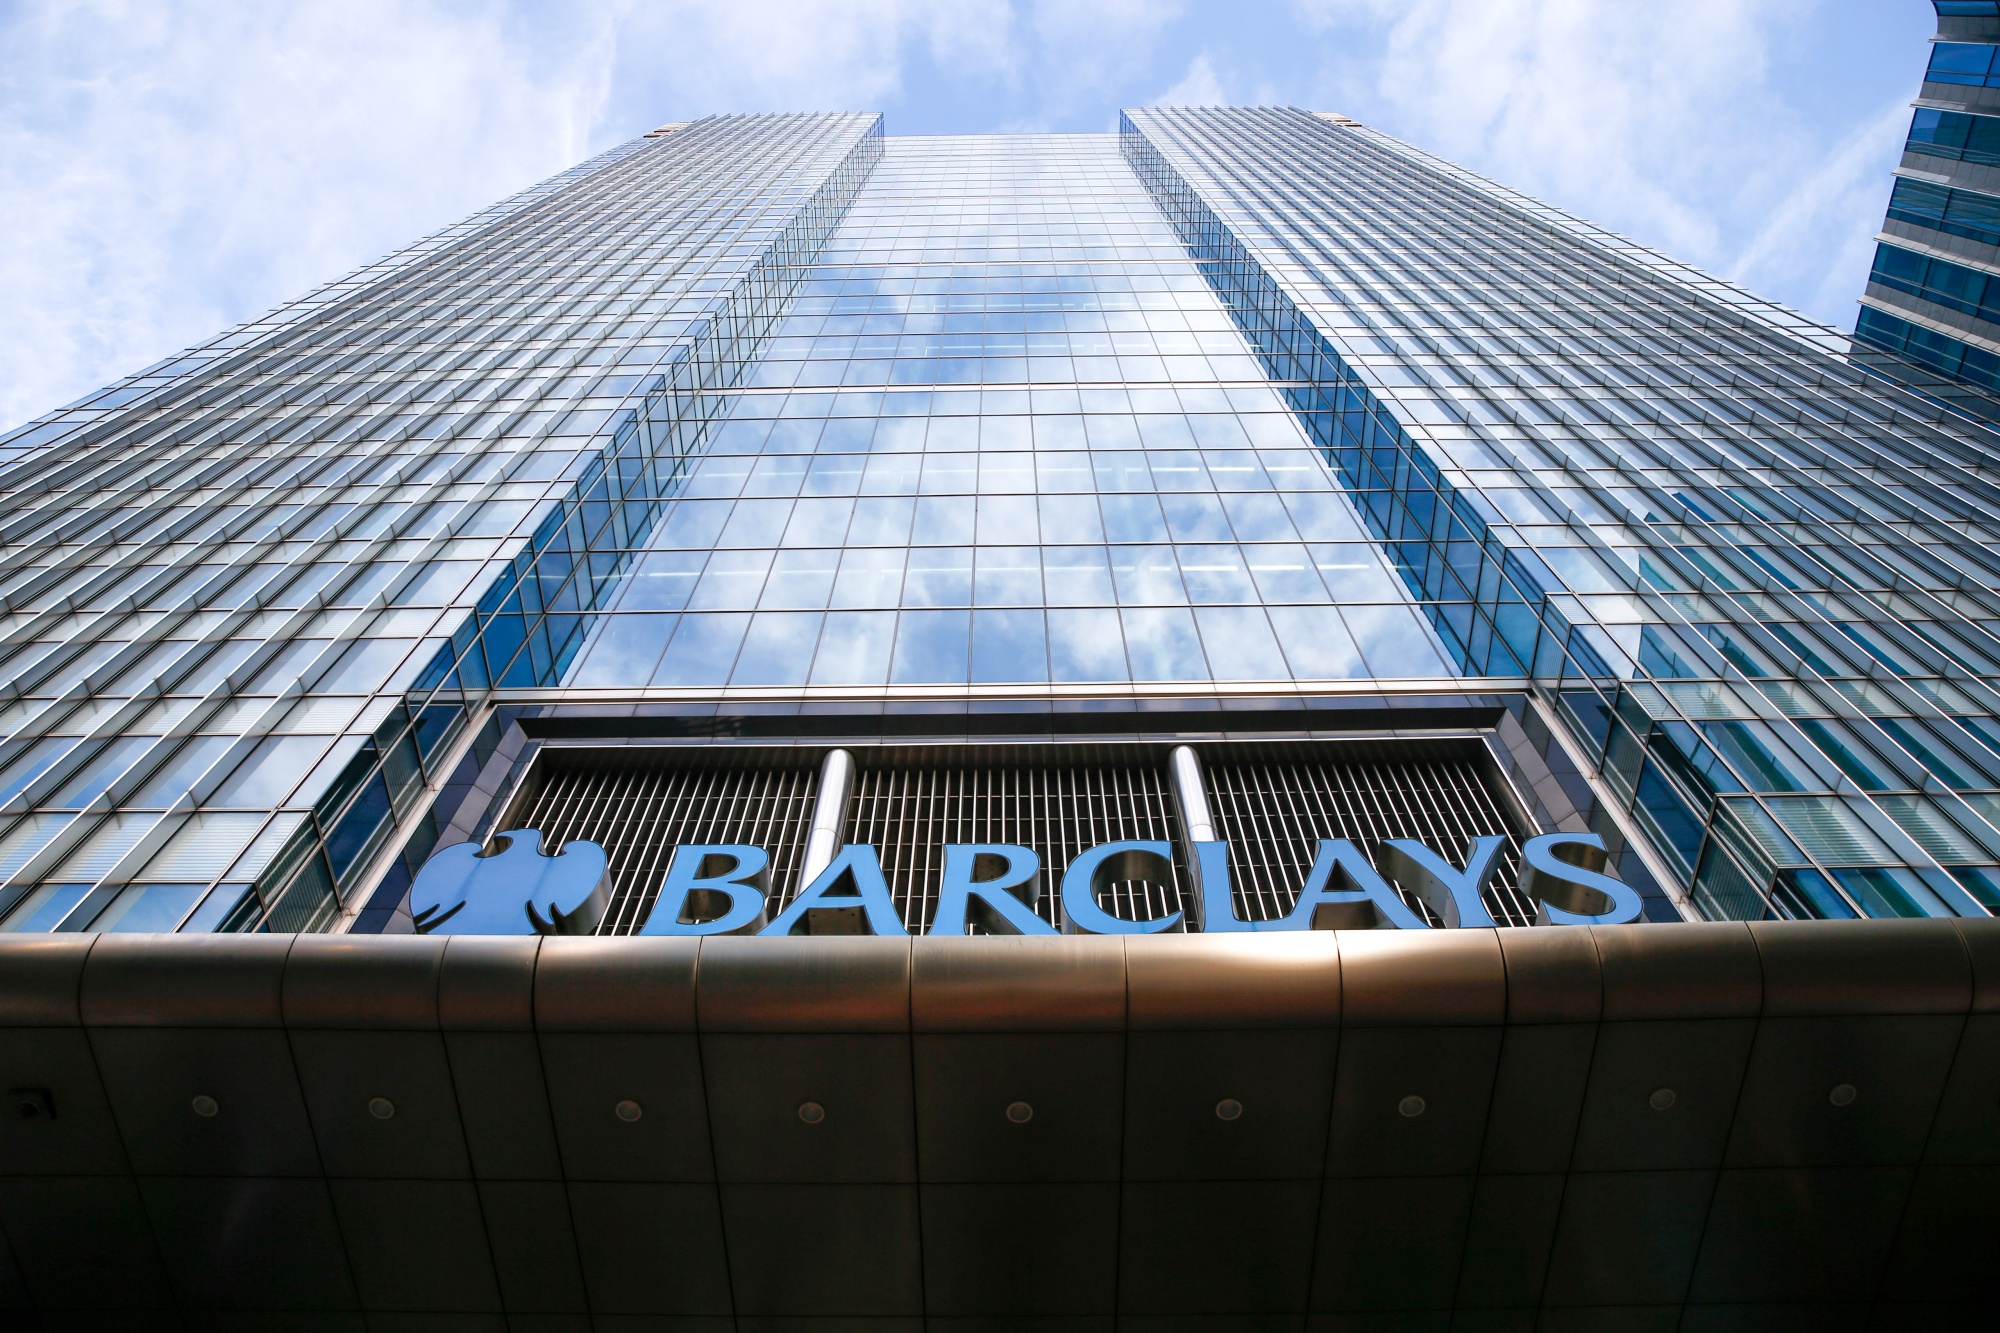 The Barclays Plc headquarters&nbsp;at Canary Wharf in London.